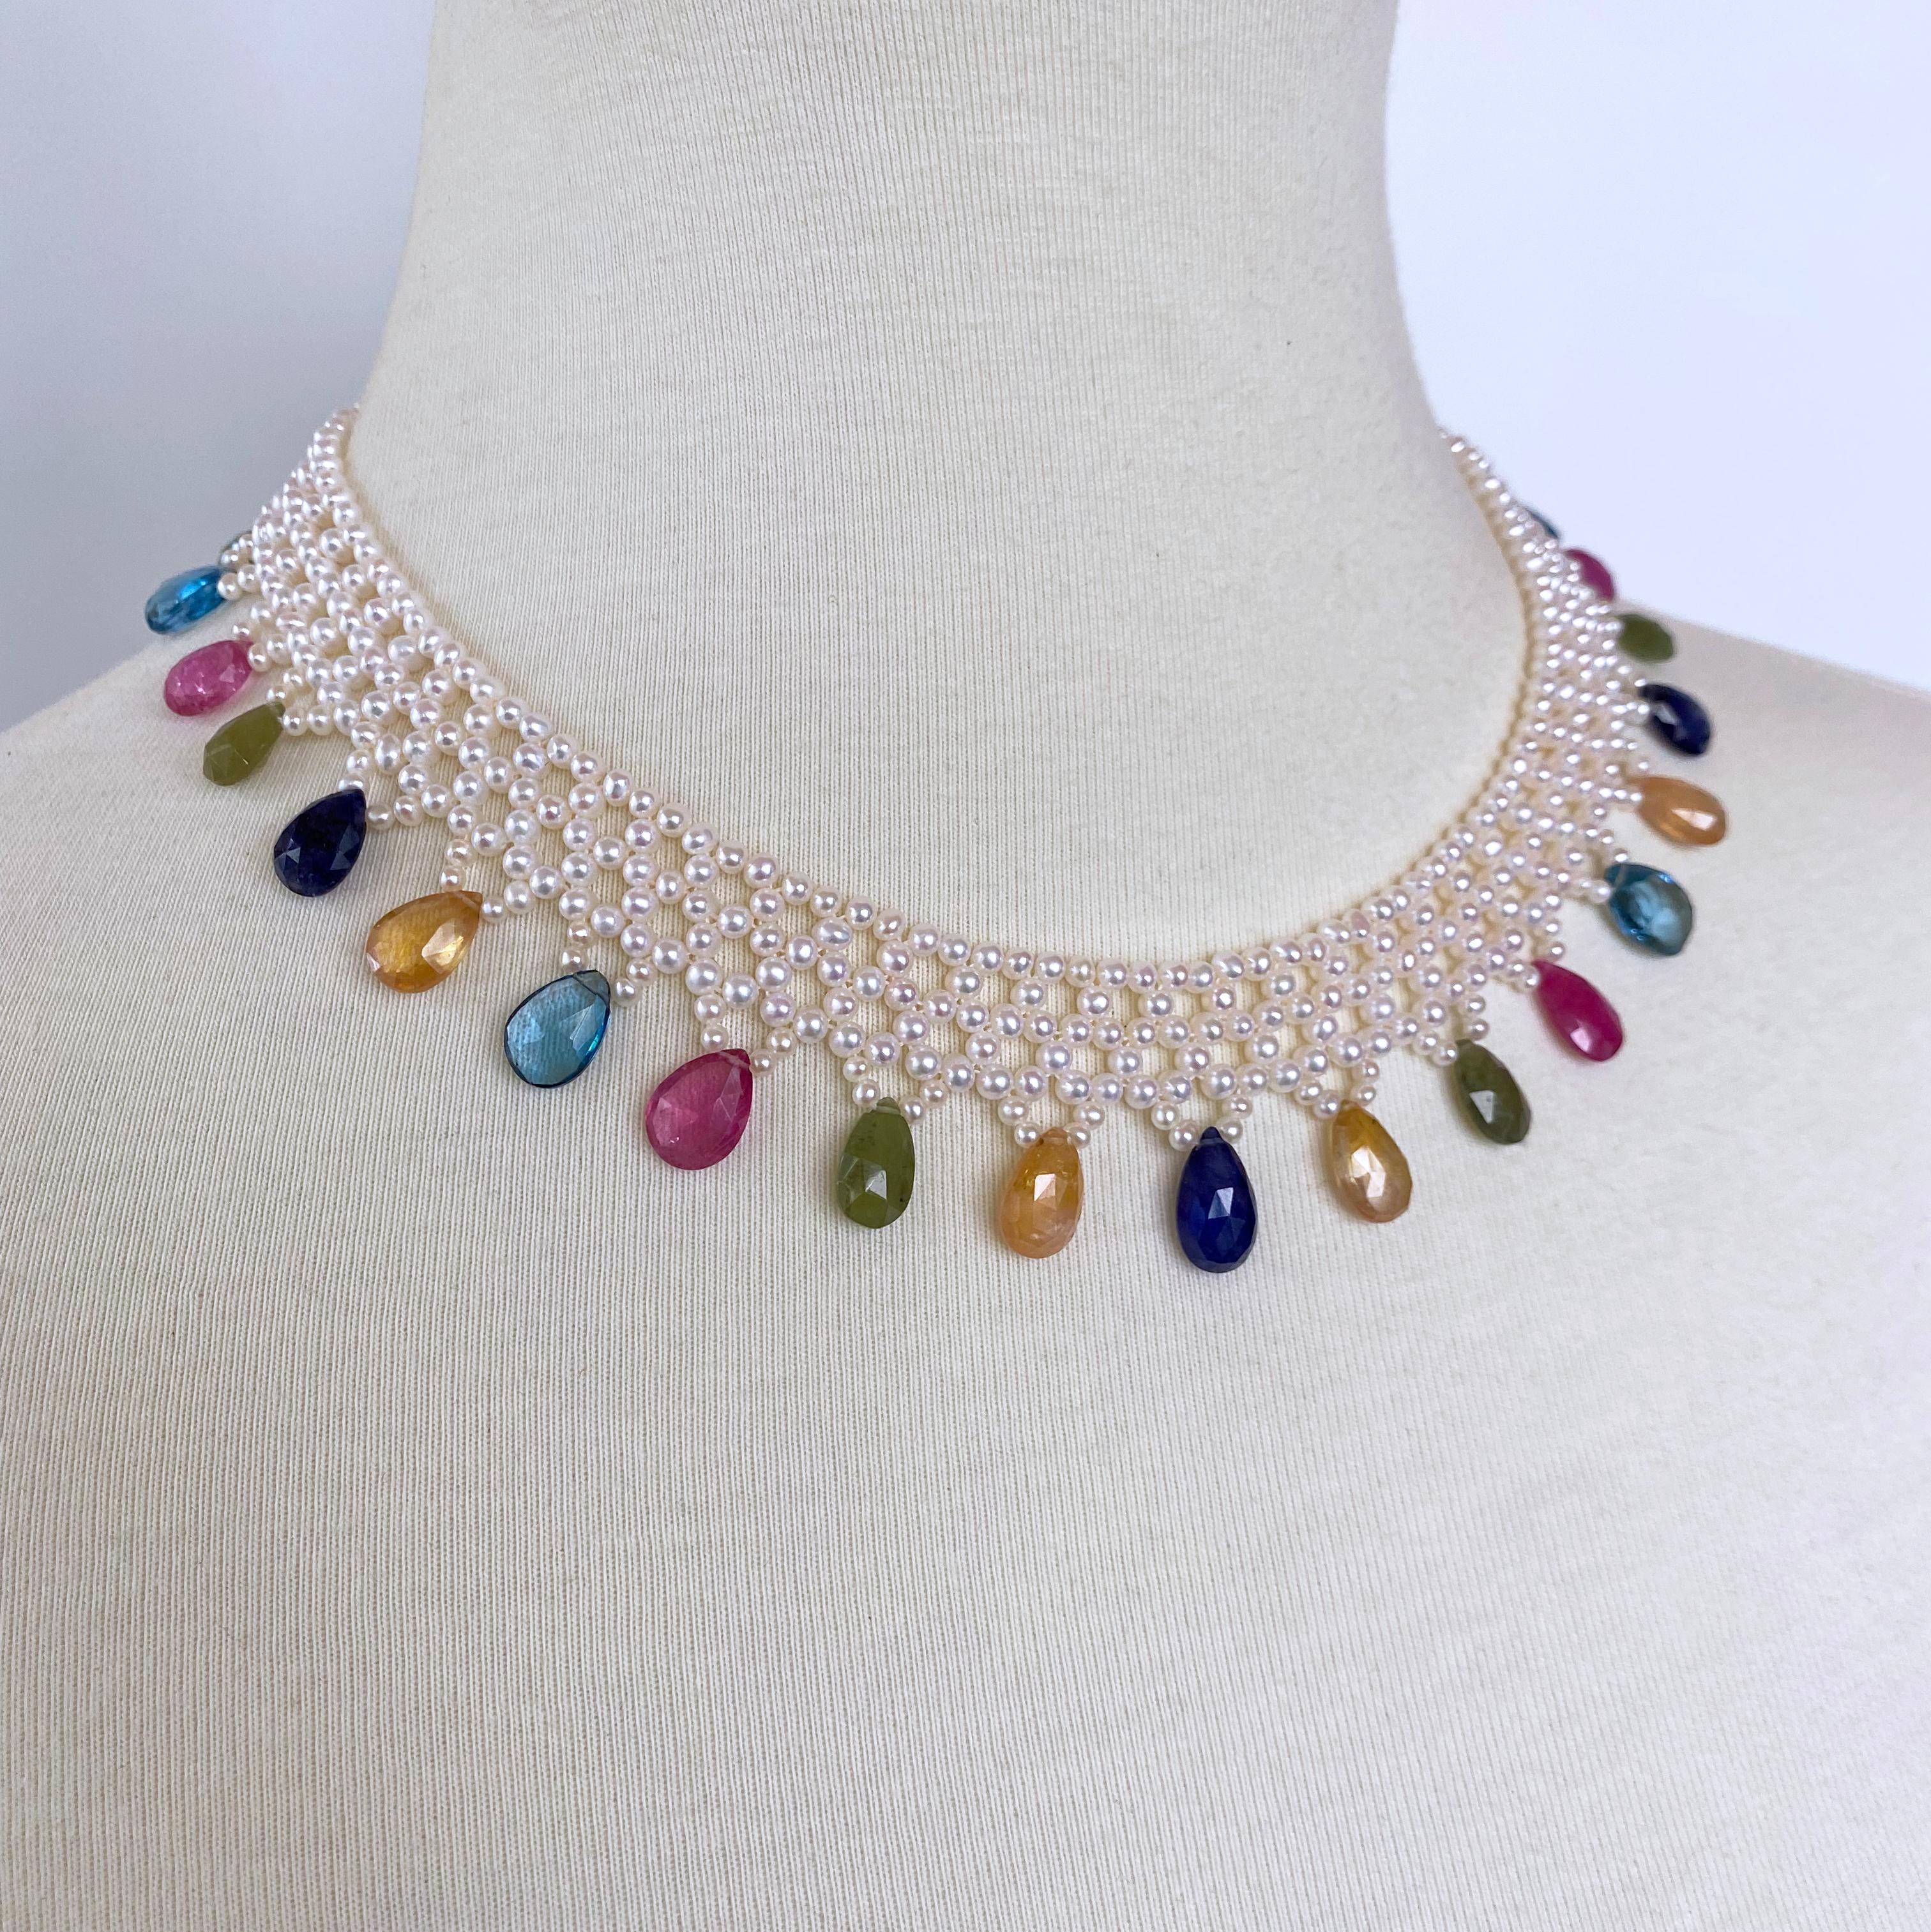 Classic hand woven necklace by Marina J. This piece is made with all cultured Seed Pearls with bright white luster, intricately woven together into a fine Lace like design - adorned by Graduated multi colored semi precious stones. London Blue Topaz,